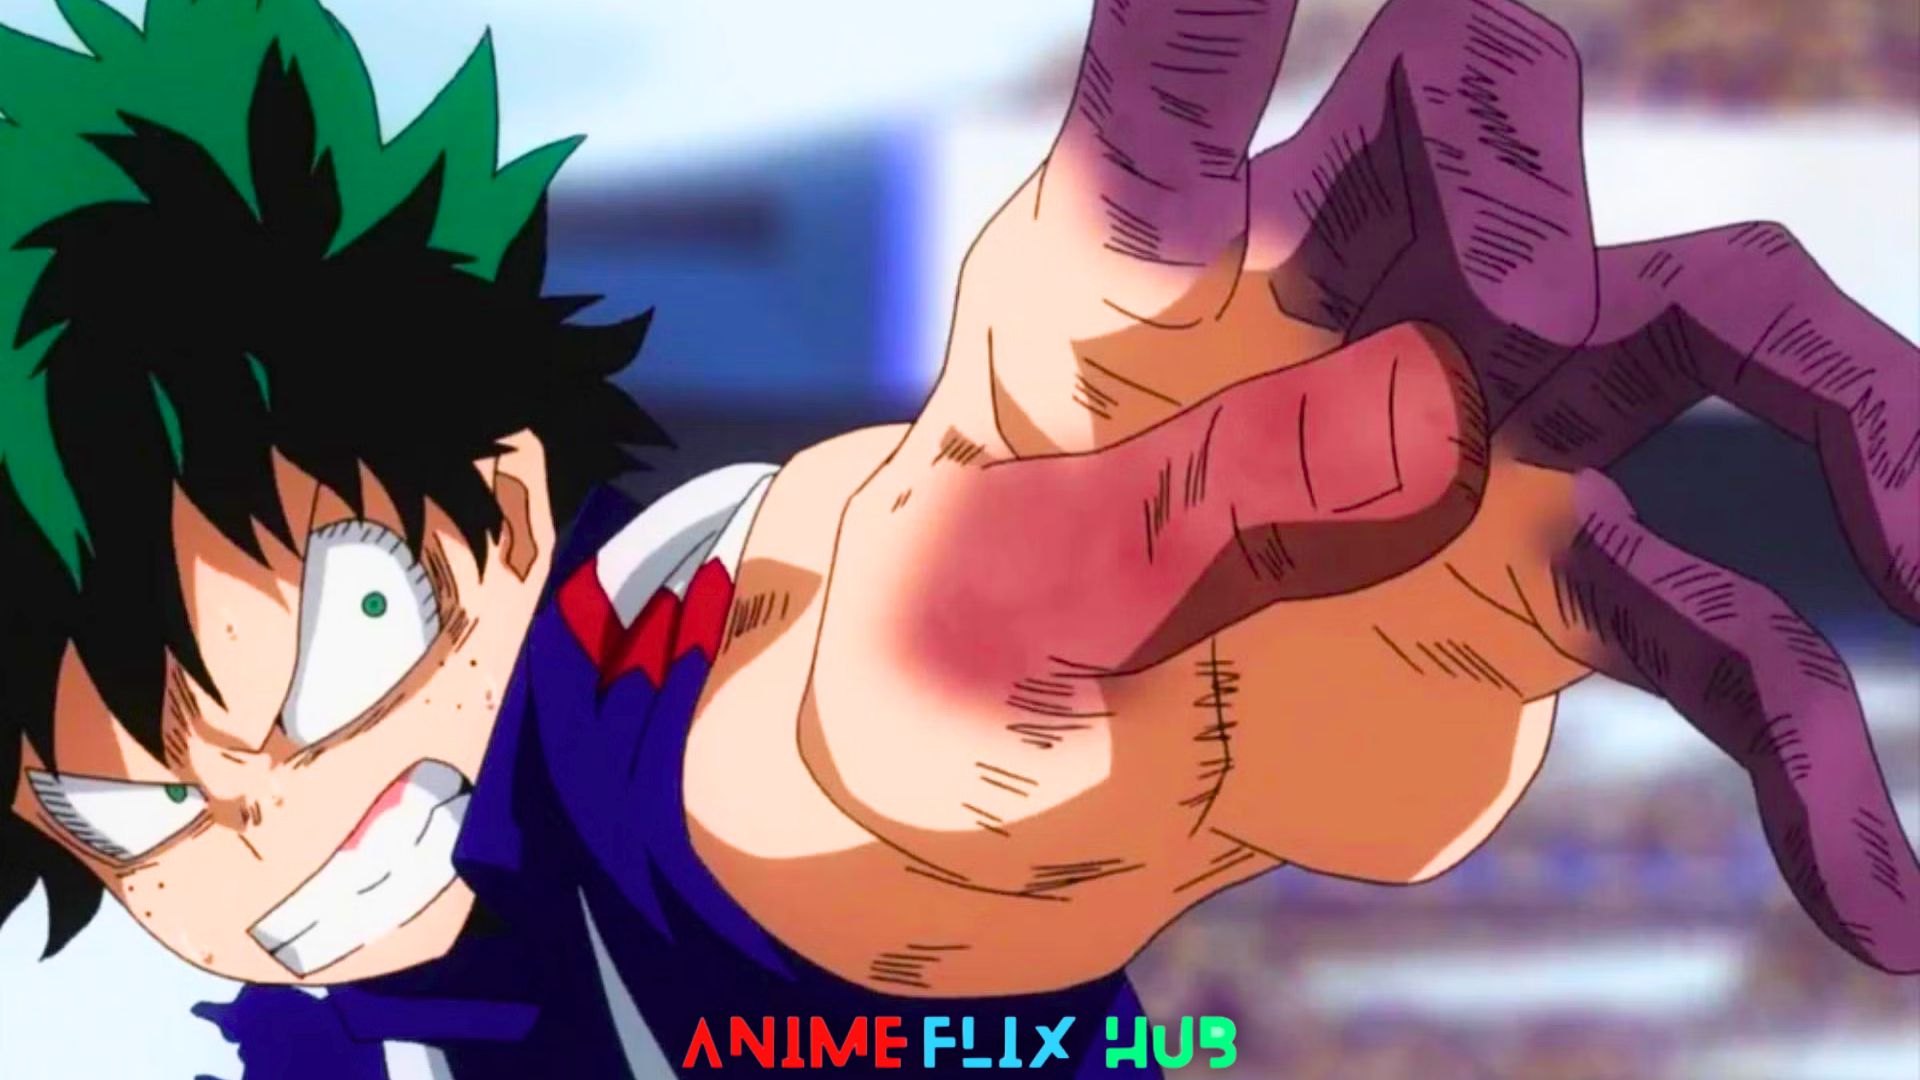 When All Might Support Deku During The Sports Festival